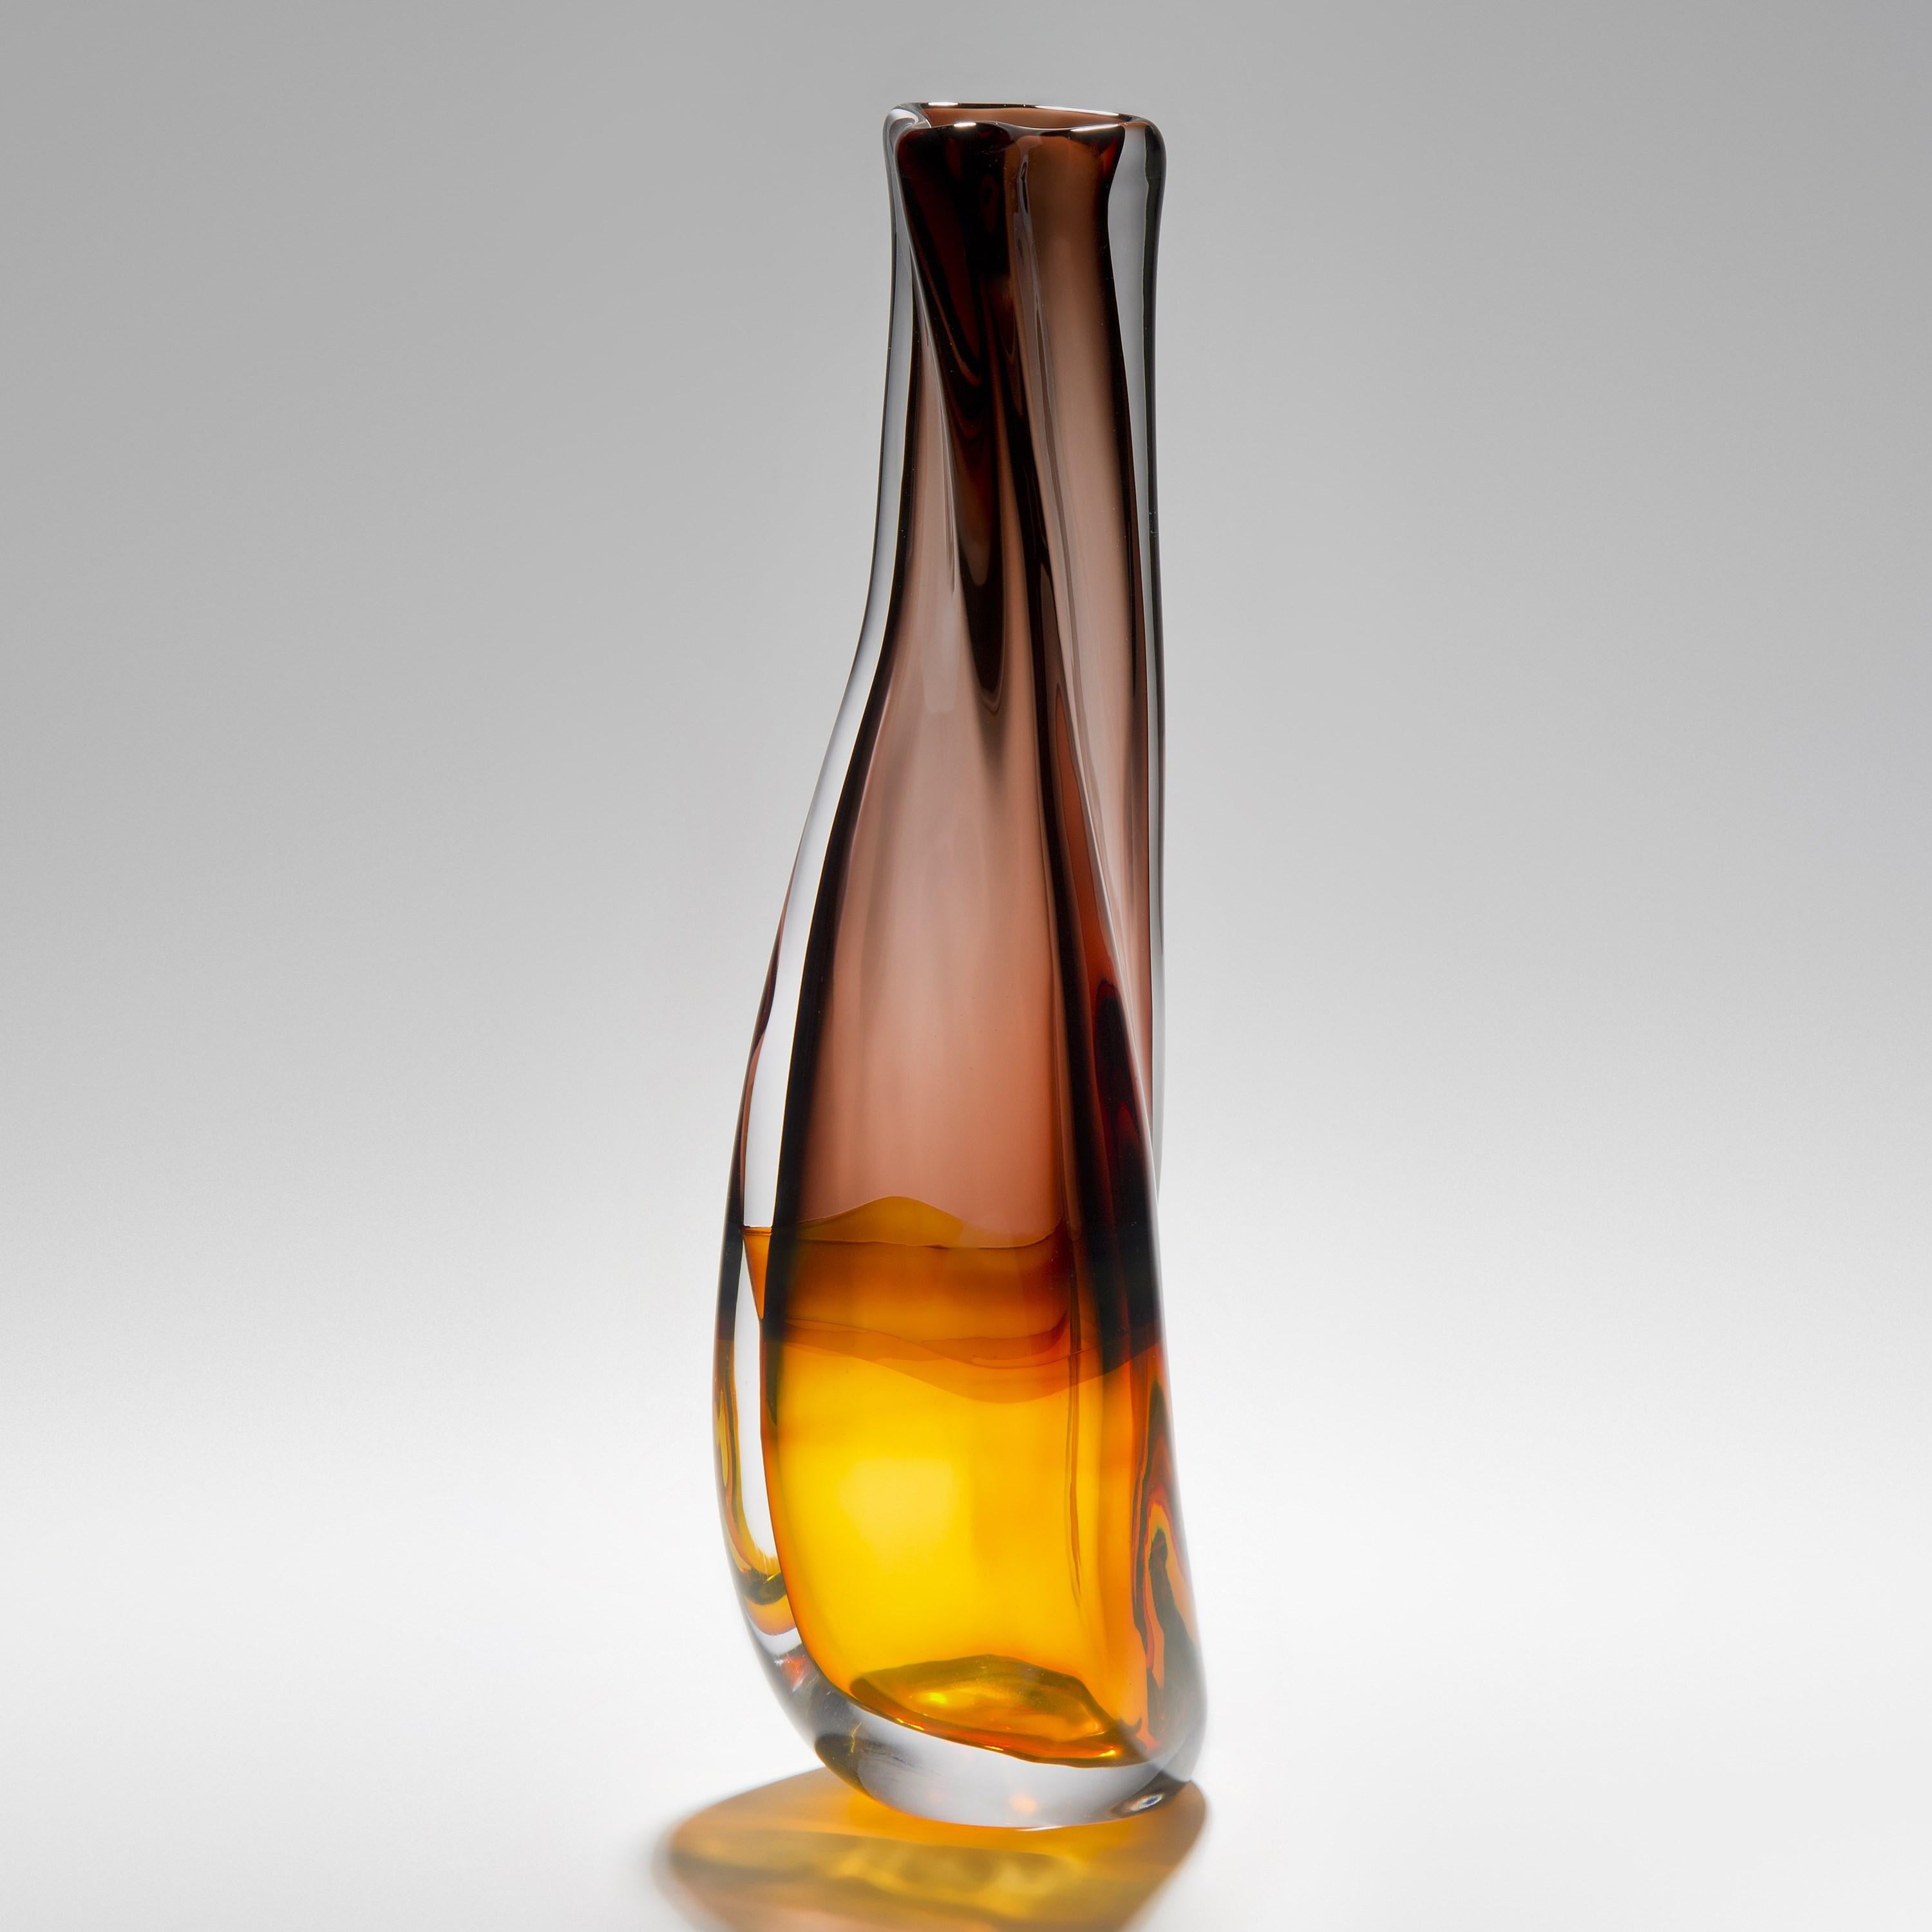 'Sommercalmo 82' is a unique hand blown sculptural vase by the British artist Vic Bamforth. Golden amber and warm brown meet and are encased in clear glass to create this stunning piece. With soft, twisting lines, the form has dynamic movement,